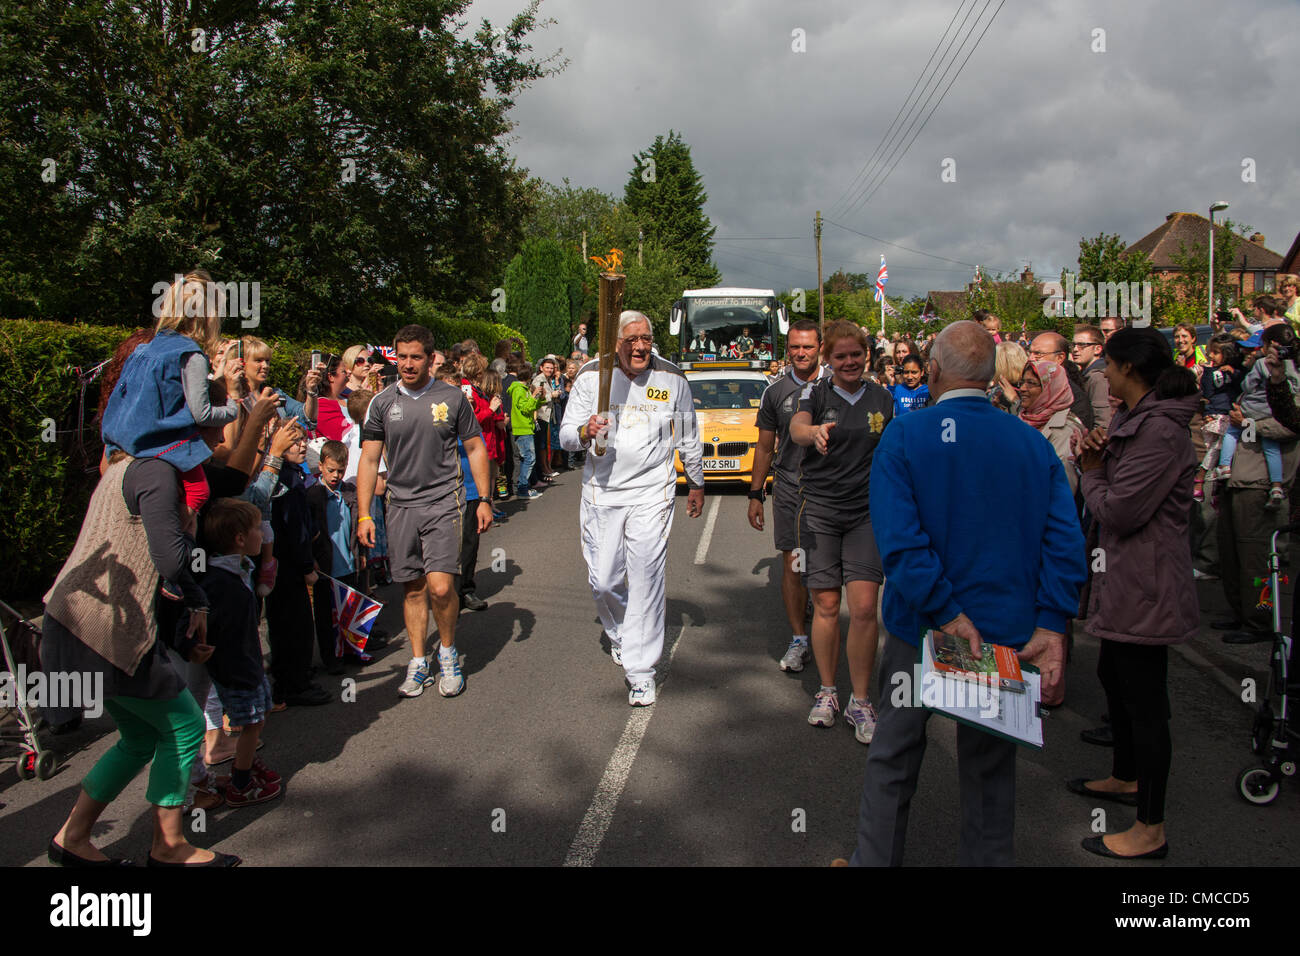 Copthorne, West Sussex, UK. 17th July, 2012. The Olympic Torch is carried through Copthorne by Derek Day. Derek played in the Great Britain hockey team which won a bronze medal in the 1952 Olympic Games. At that time there were only 11 medals given out and so both he and one of the other squad members missed out on receiving a medal. In partnership with the BOA, GB Hockey was able to put this right in 2010 he was given a medal made from the original cast. Stock Photo